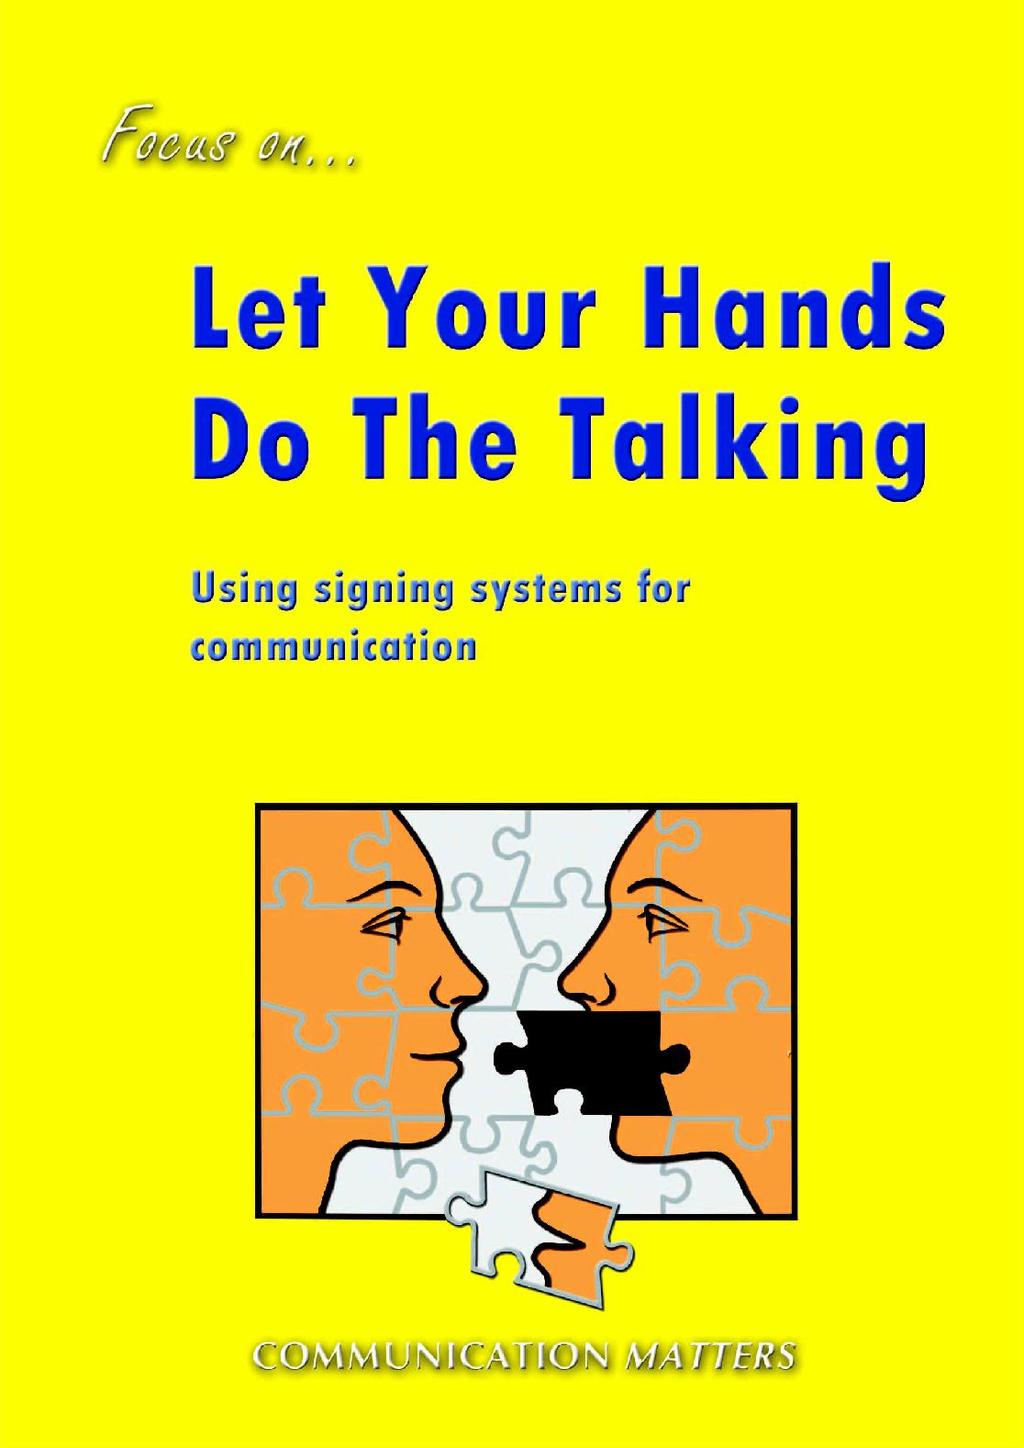 Let Your Hands Do The Talking Using sugn1ing sys~ems